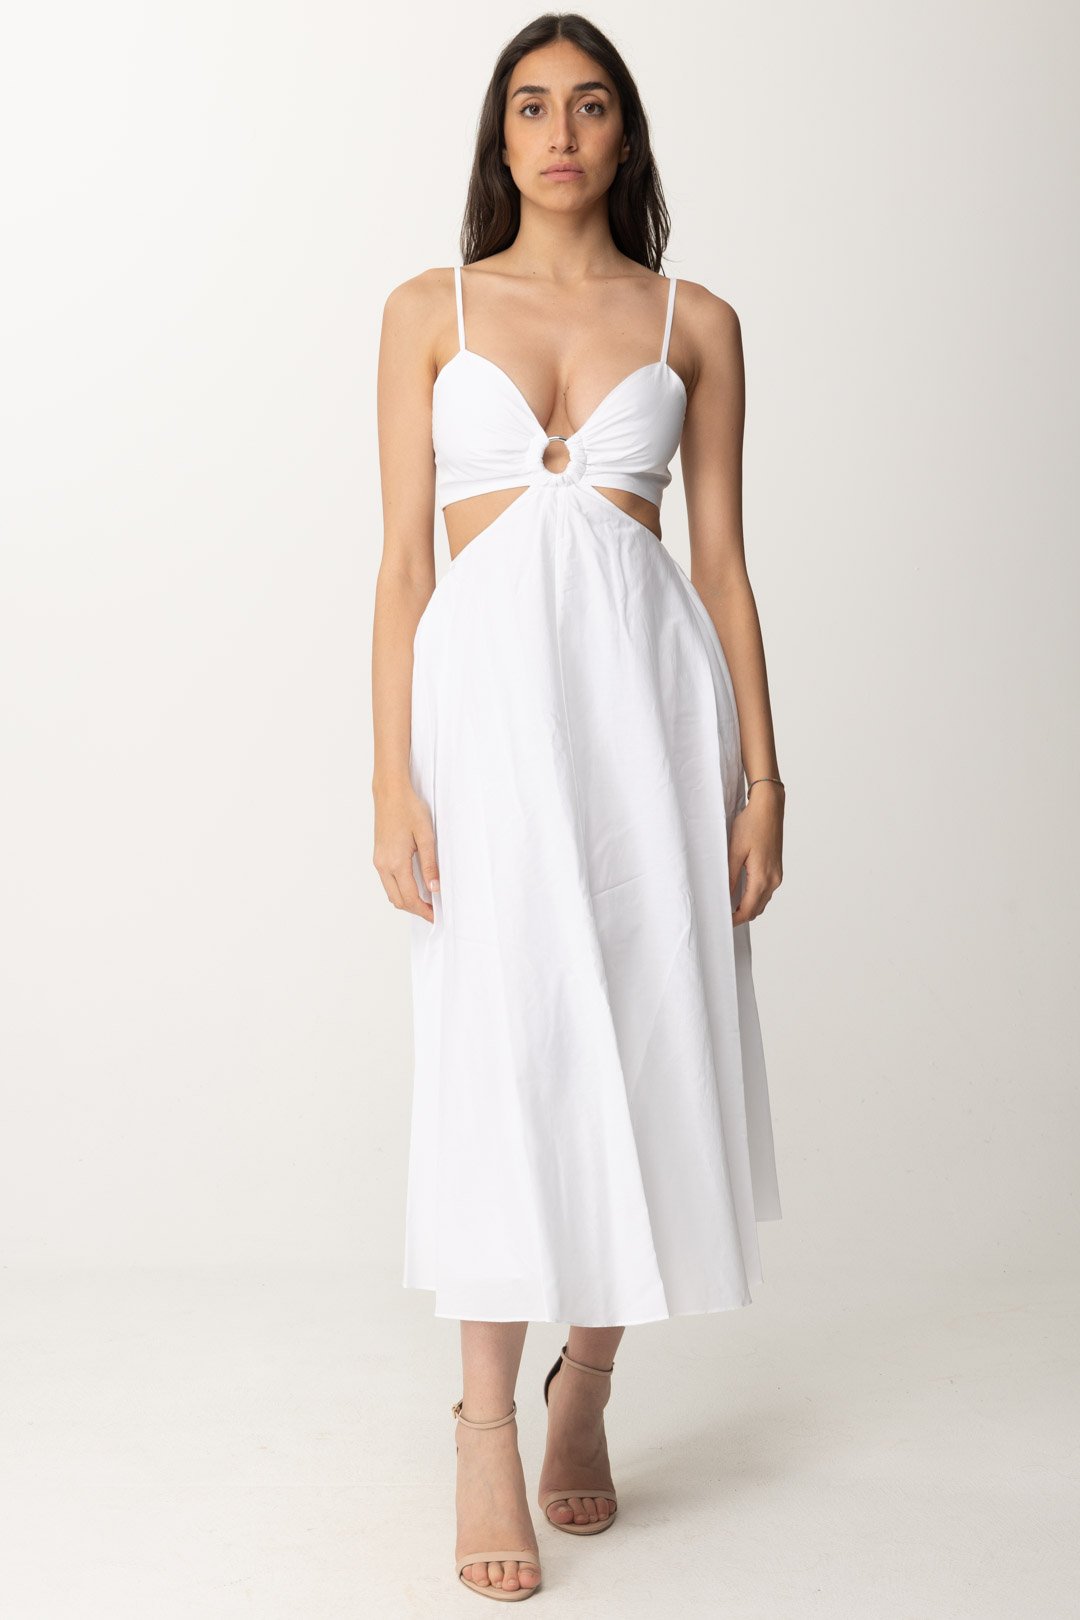 Preview: Michael Kors Midi dress with cut-out WHITE